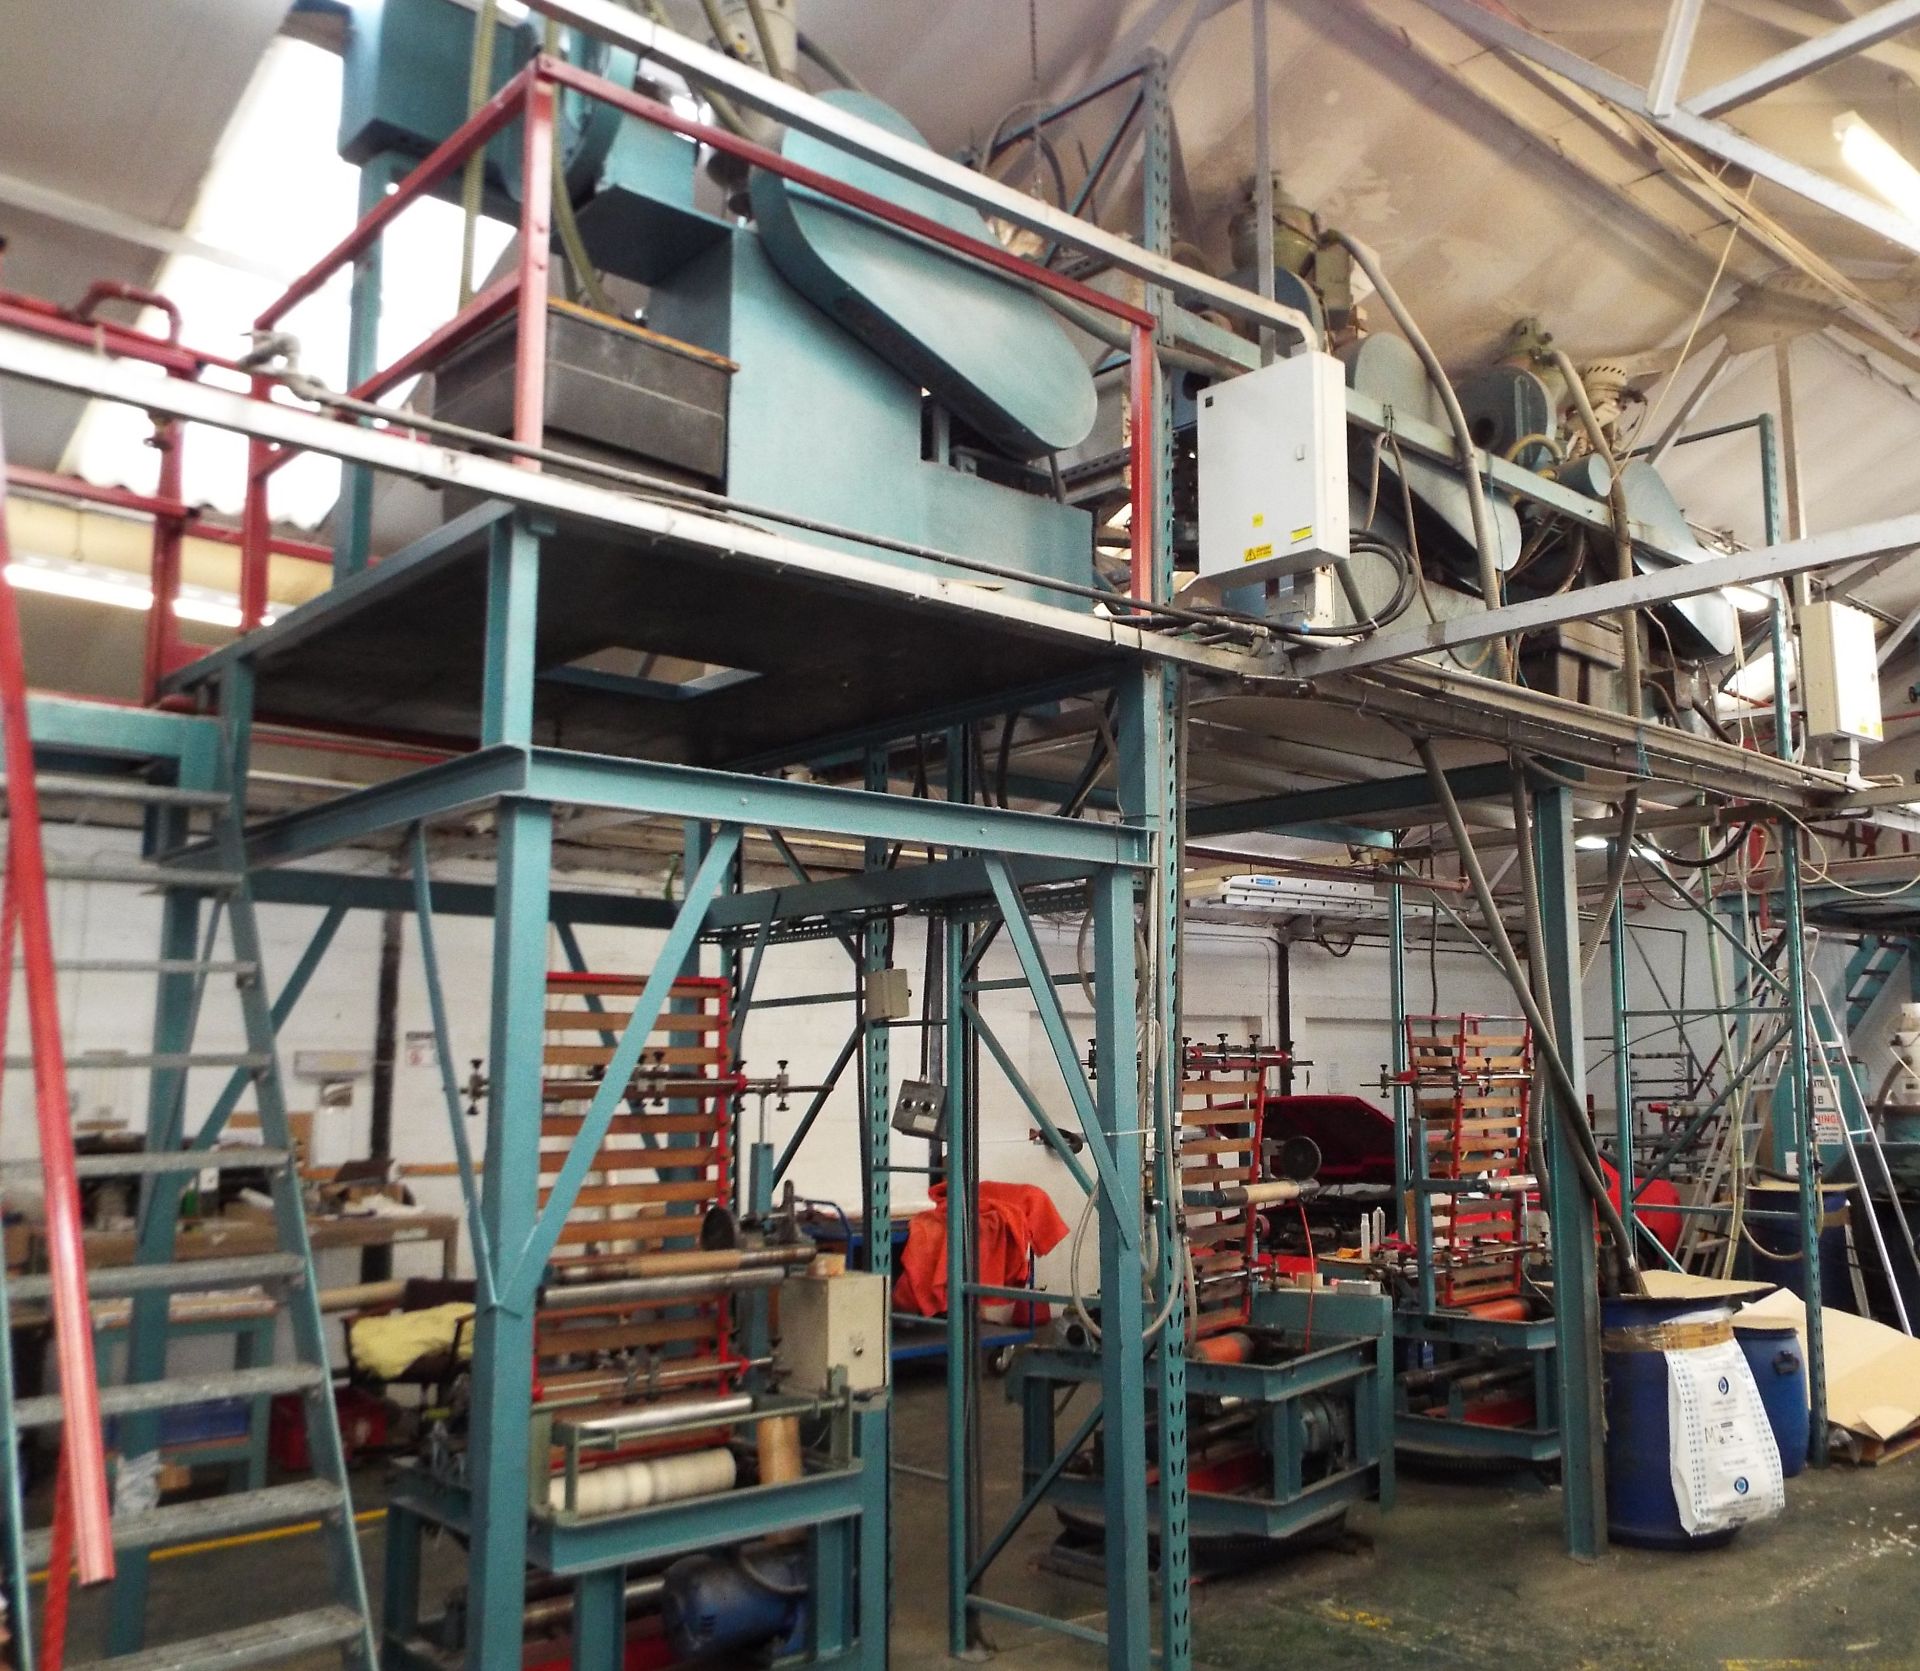 Complete Contents of A Lay-Flat Polythene Tube,Side Weld Bagging Facility & Support Equipment.